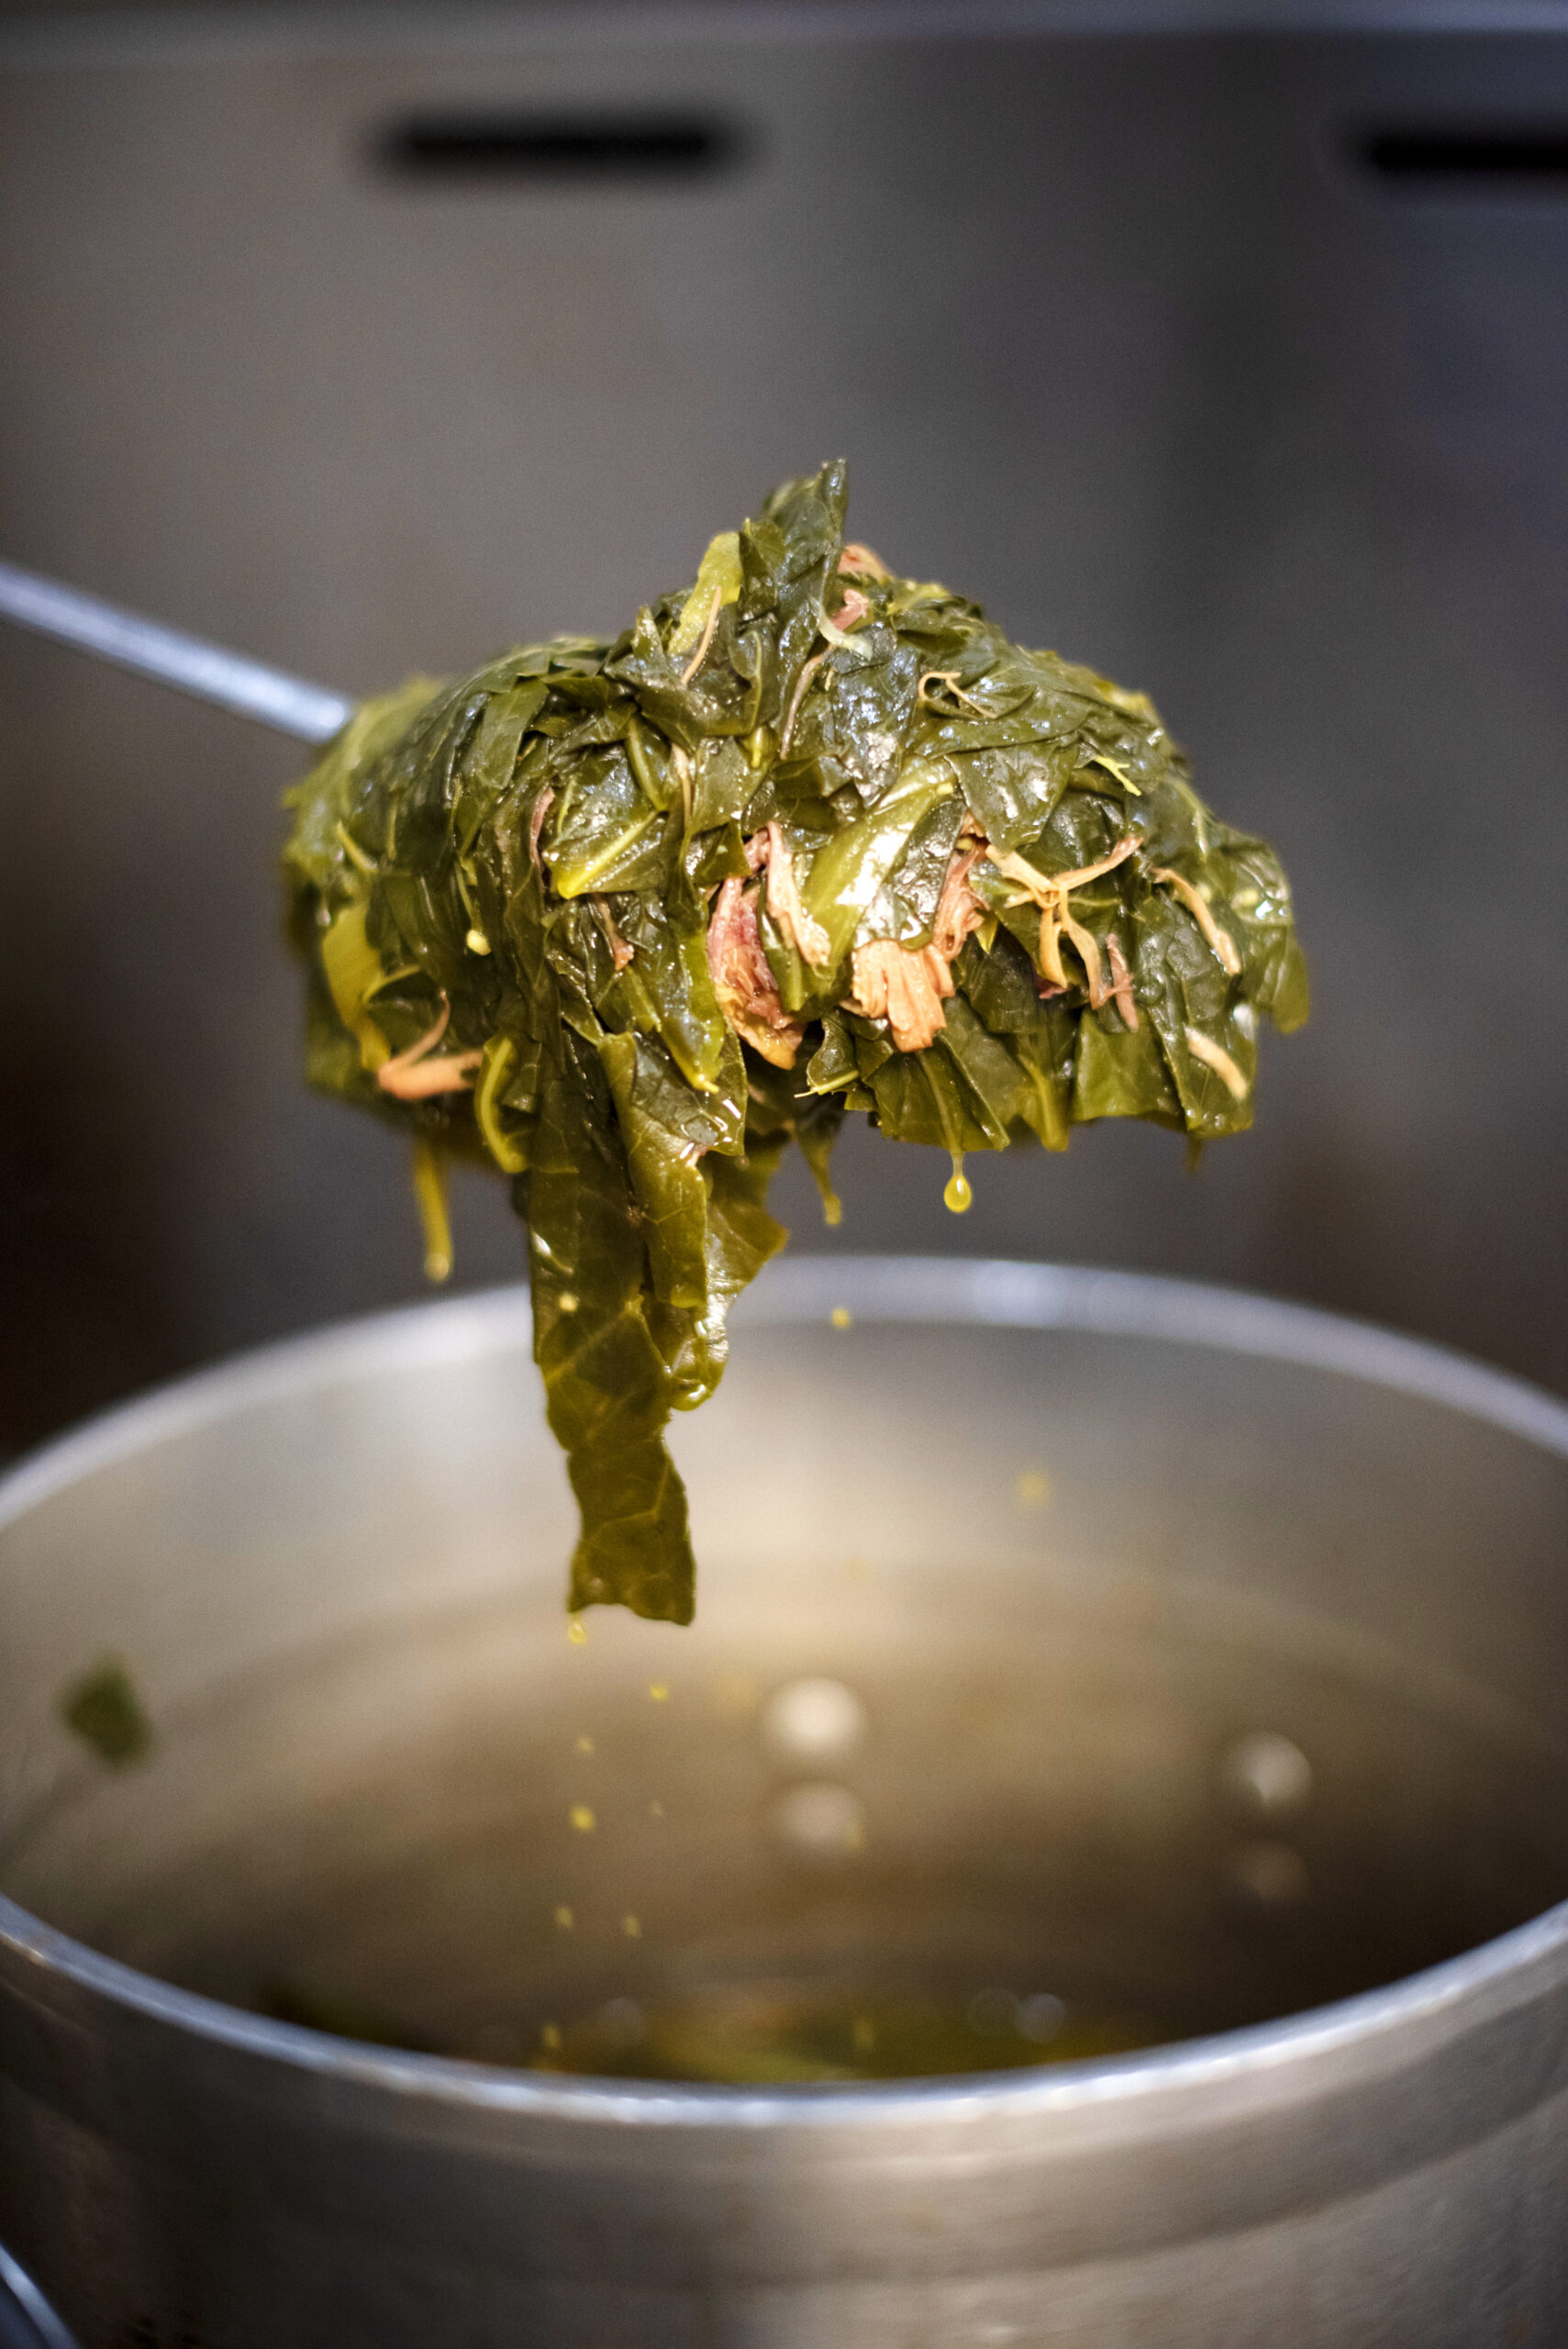 Collard greens by Kris Austin of Austin's Southern Smoke BBQ which he served at Old Possum Brewing Co. in Santa Rosa, California on May 6, 2022. (Photo: Erik Castro/for Sonoma Magazine)